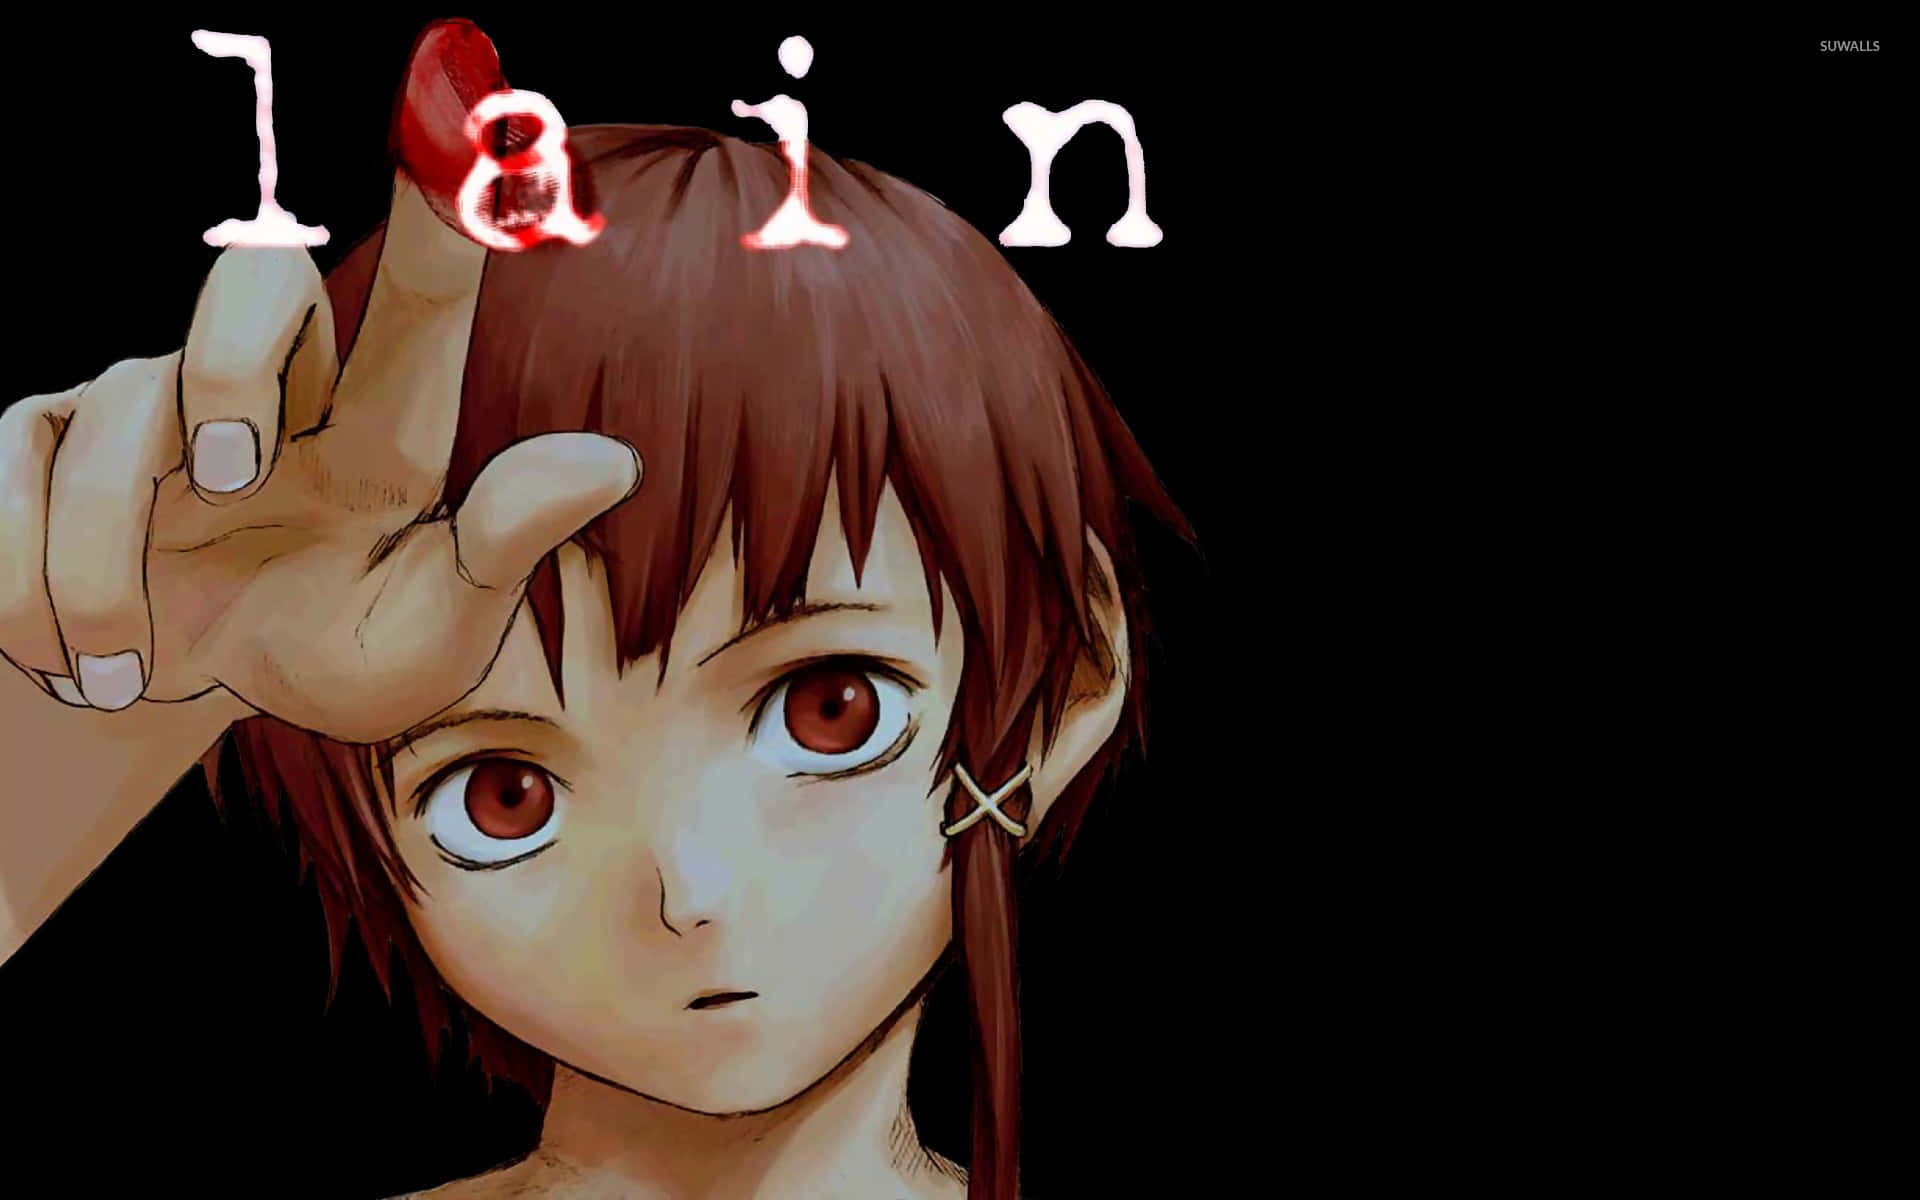 Serial Experiments Lain: Projecting The Human Mind Background